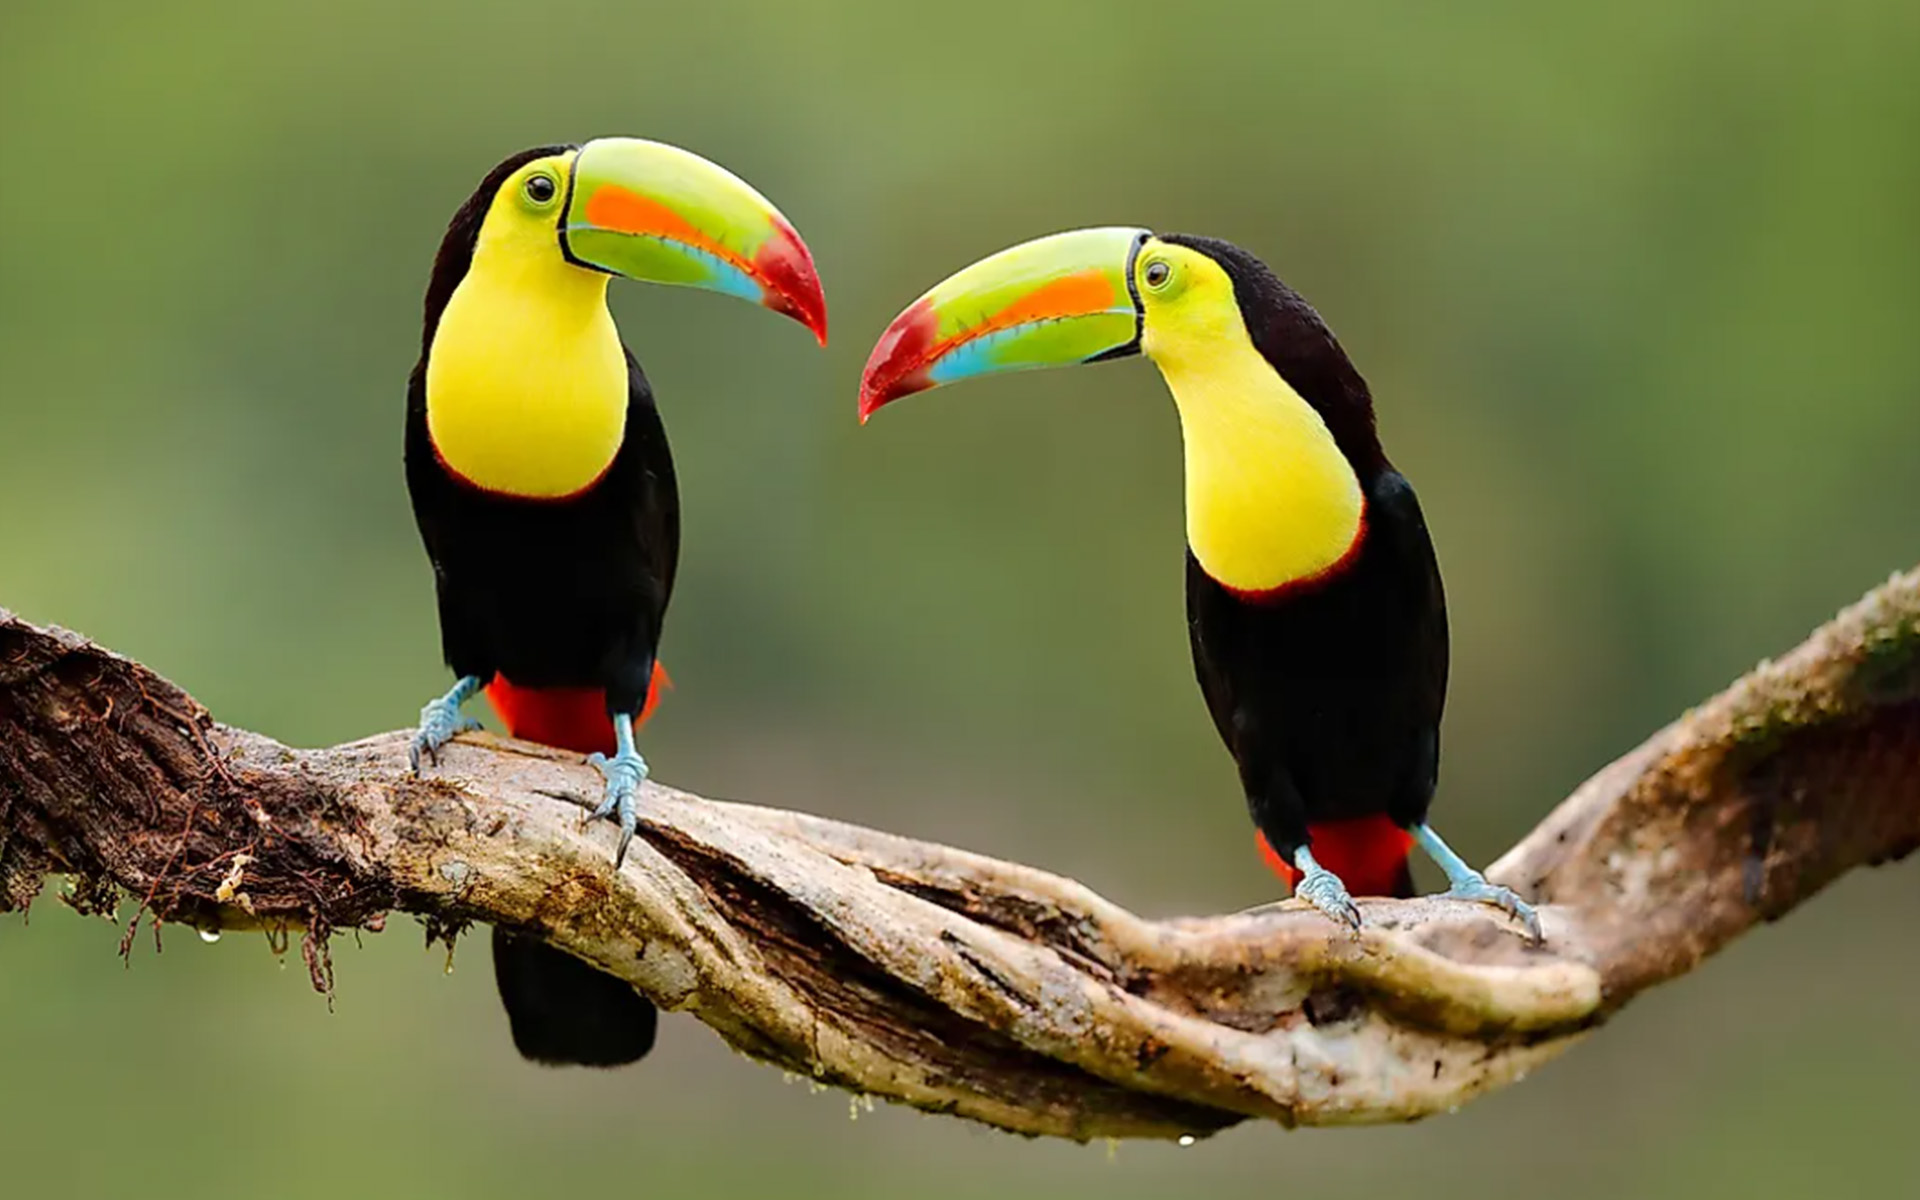 Two toucans sitting on a branch.